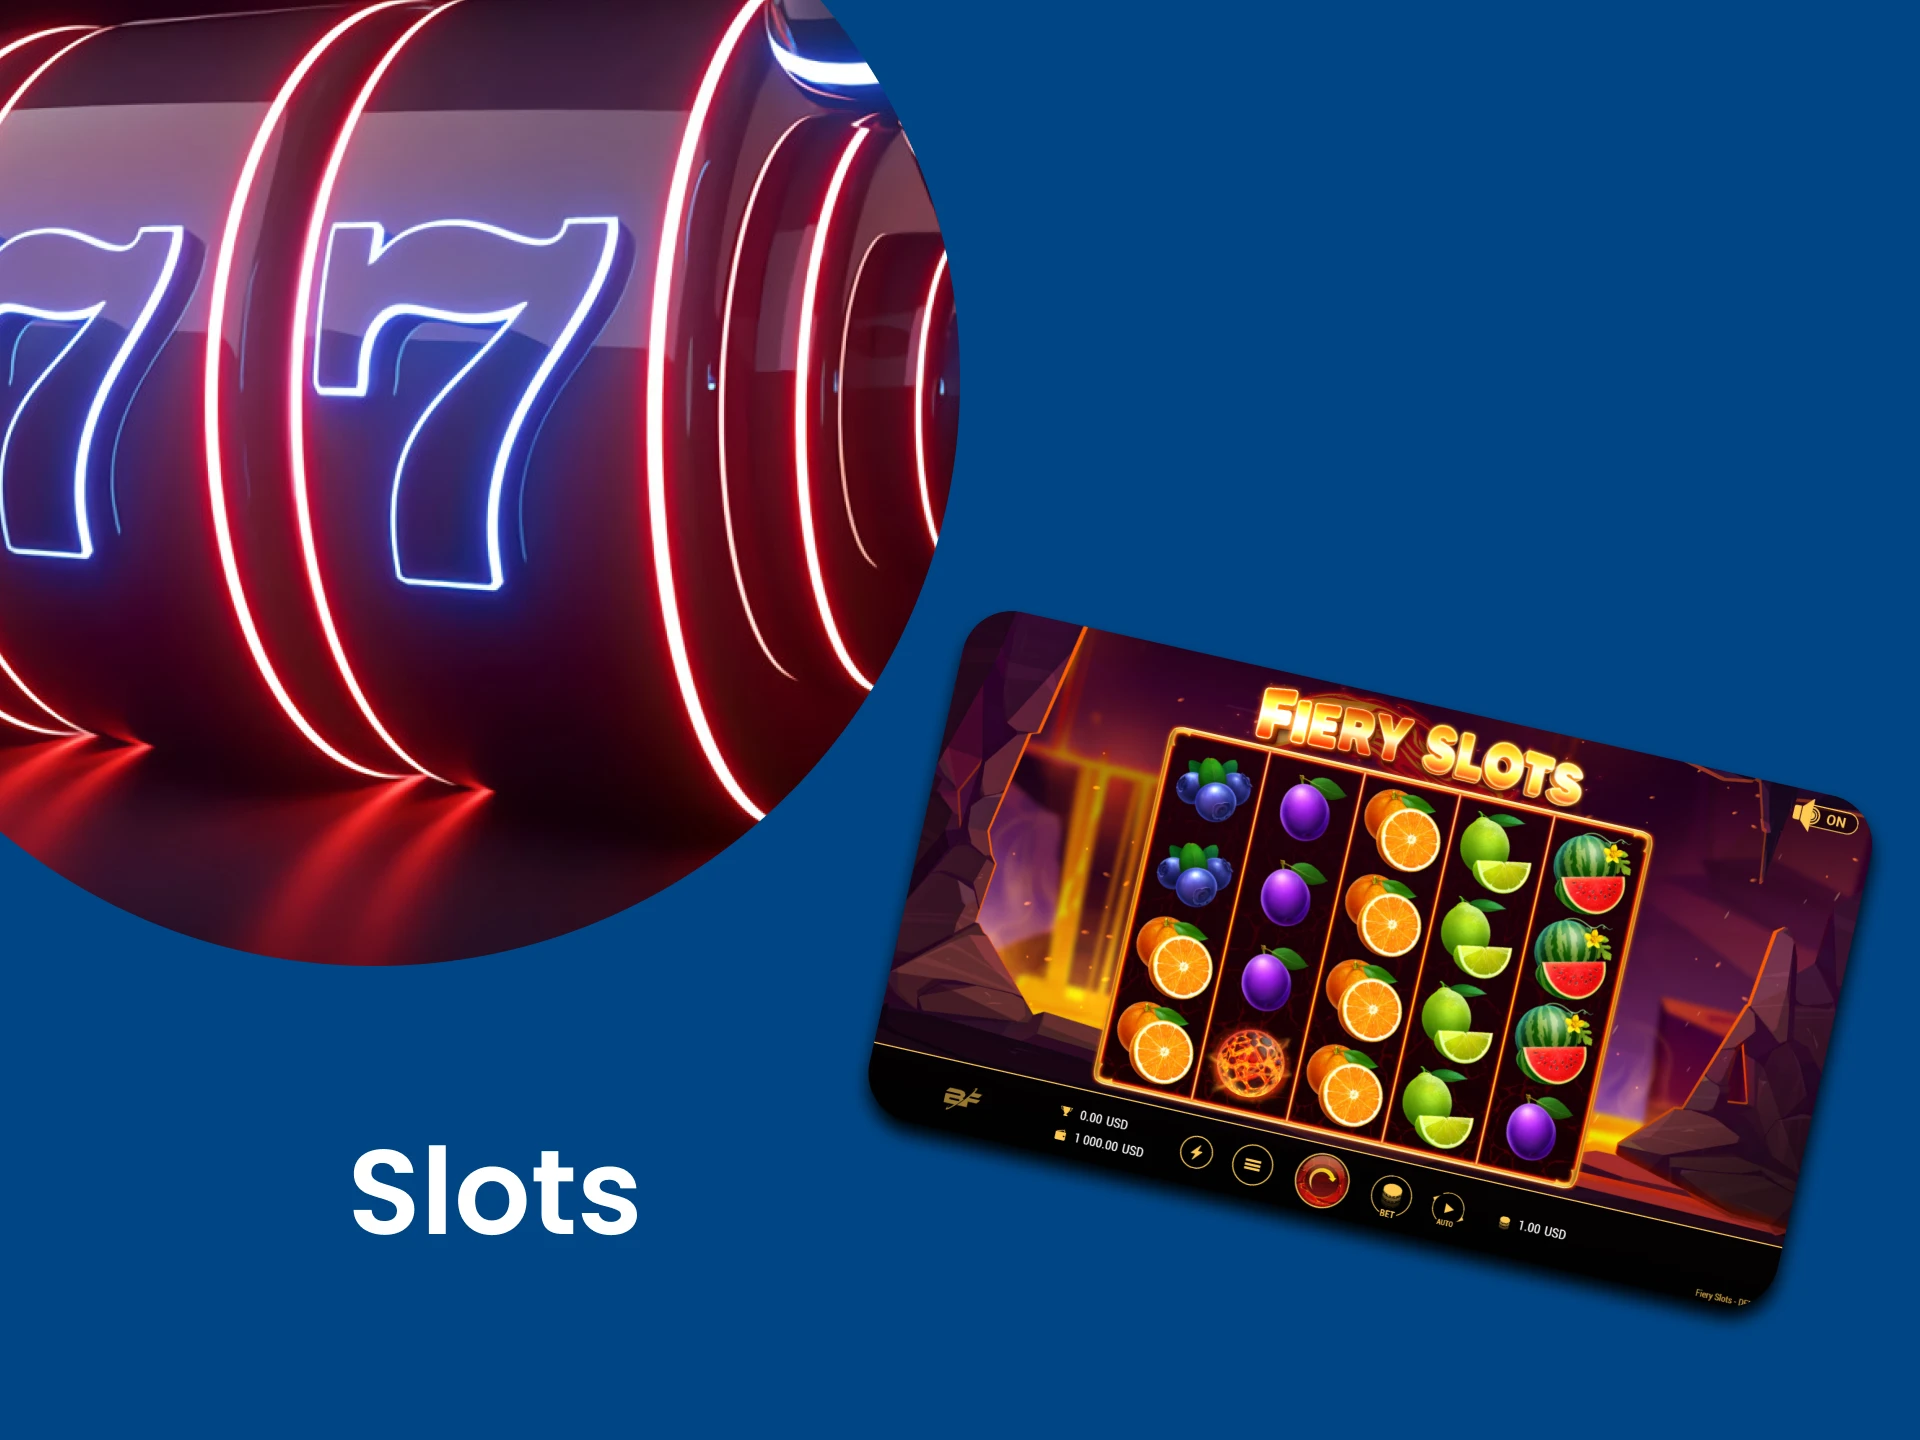 For casino games, choose Slots.